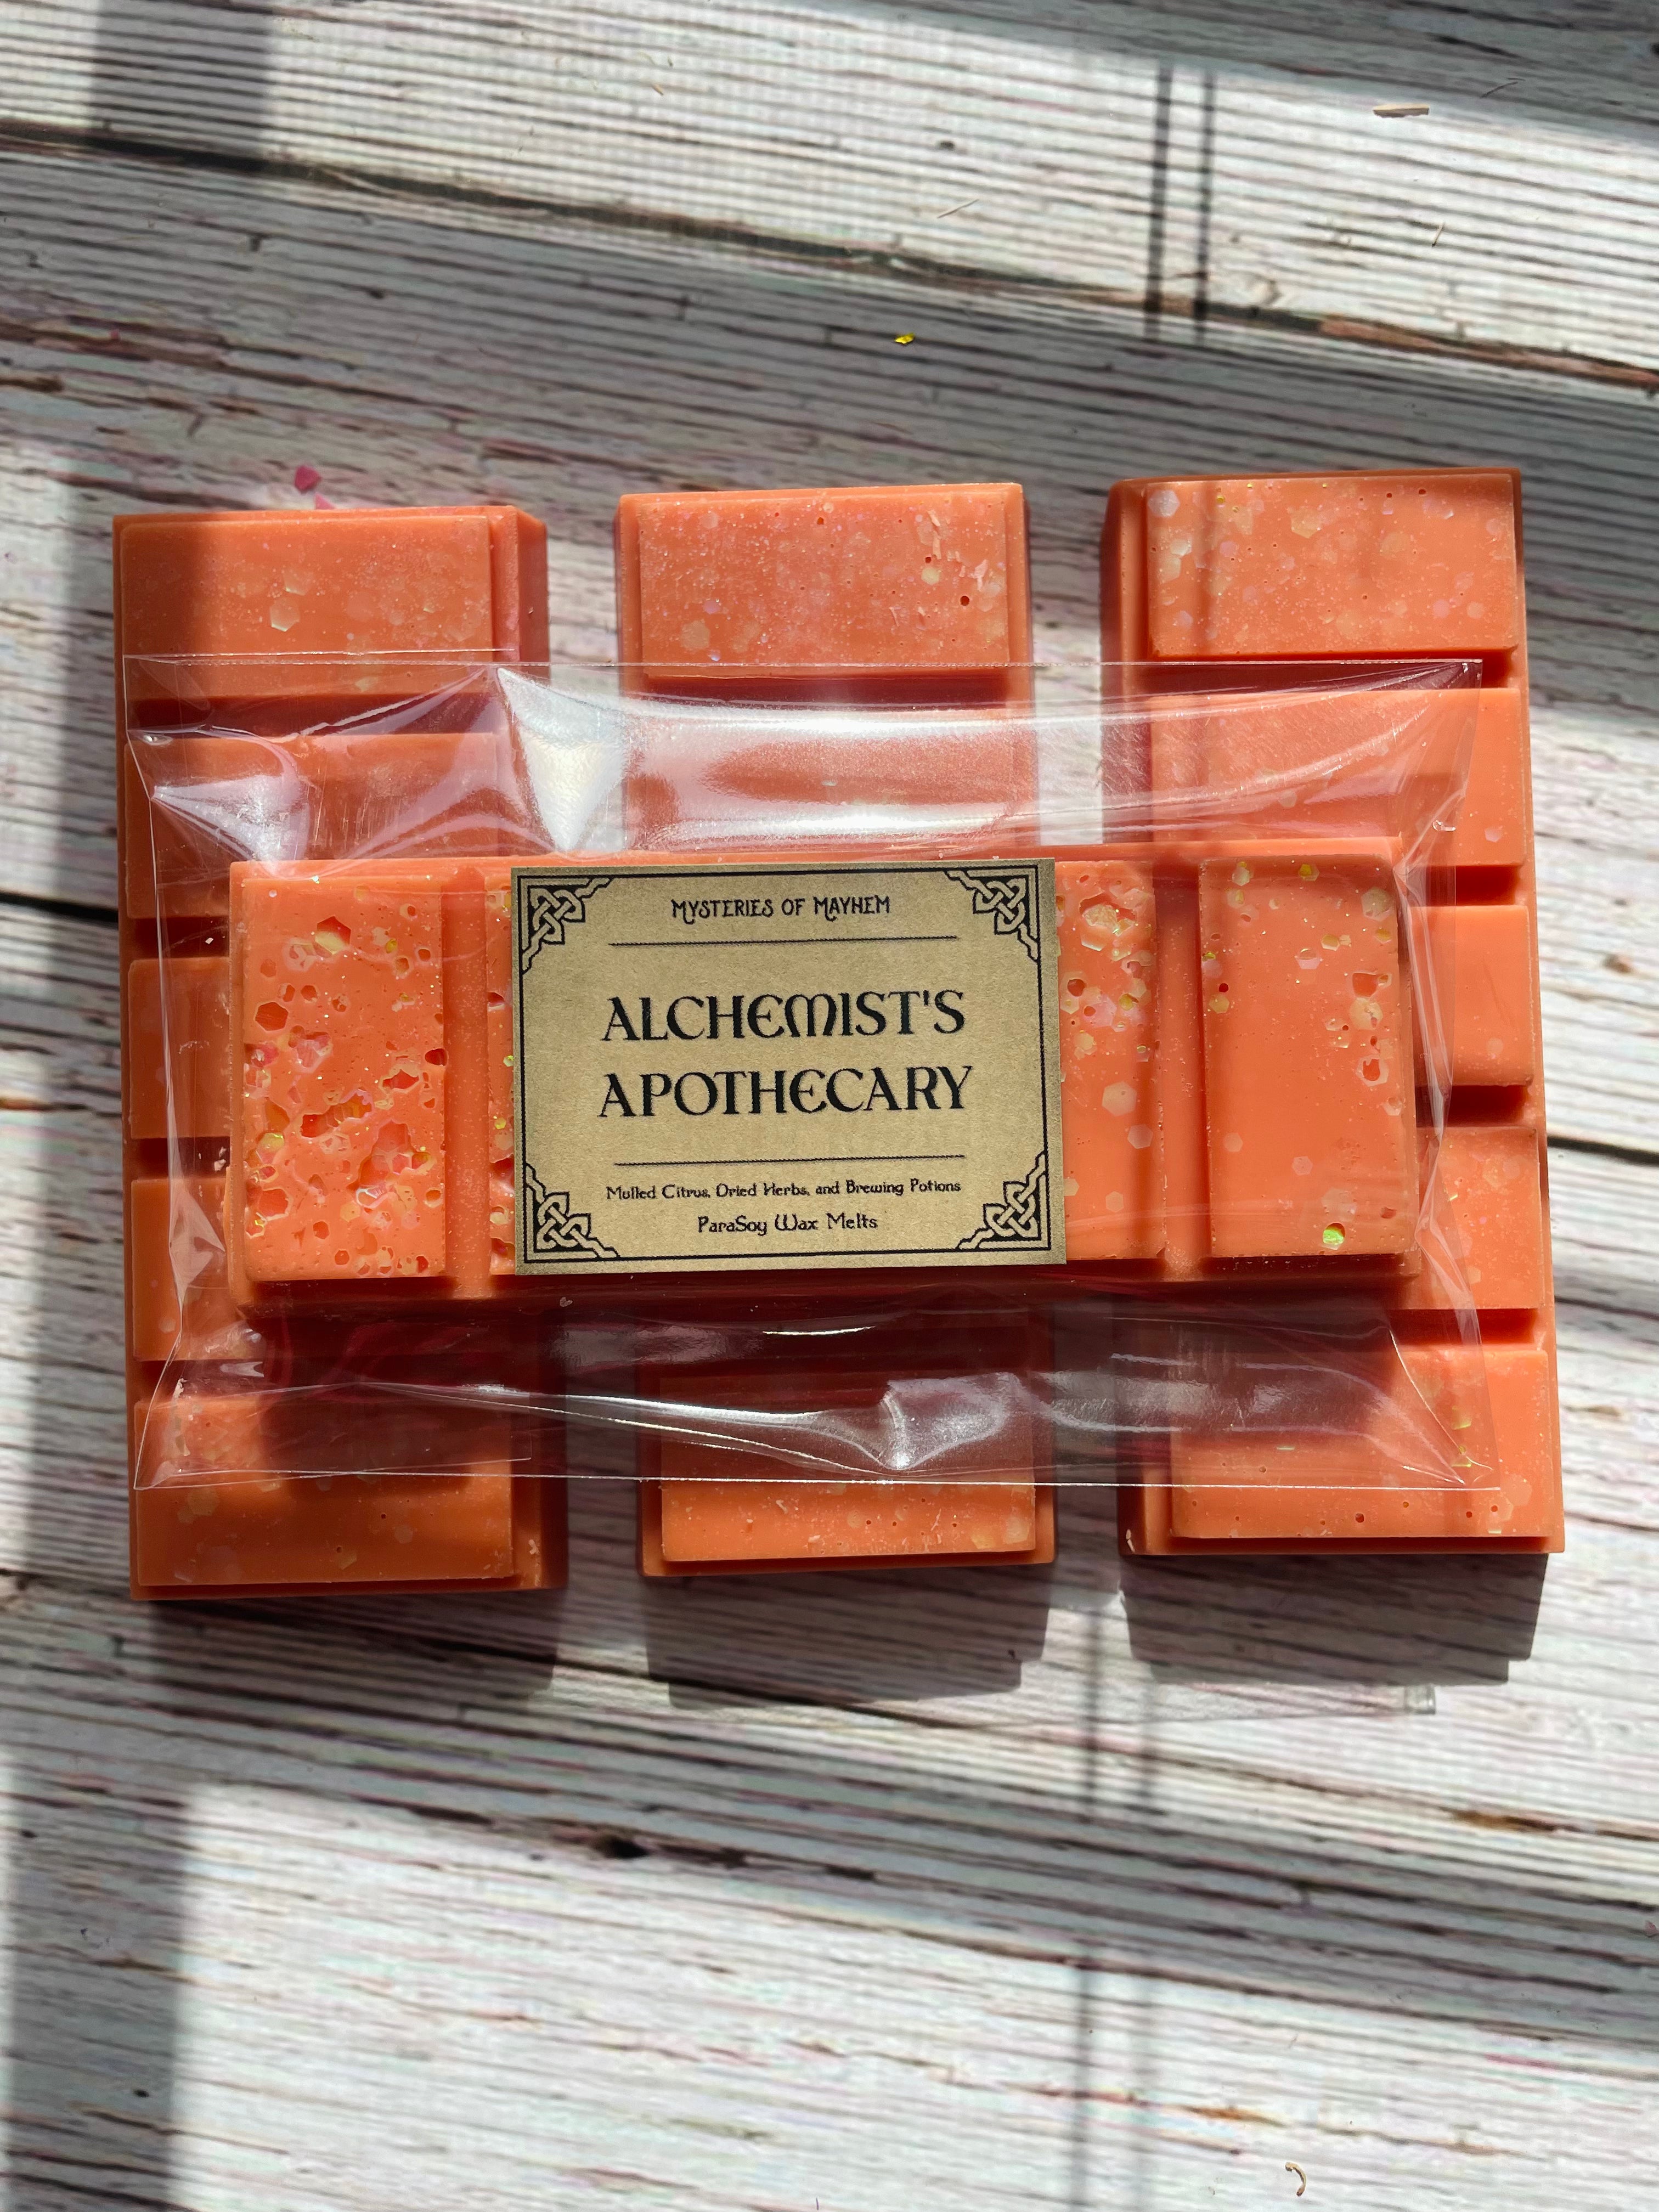 Alchemist’s Apothecary Wax Snap Bar - Mulled Citrus, Dried Herbs, and Brewing Potions Scented